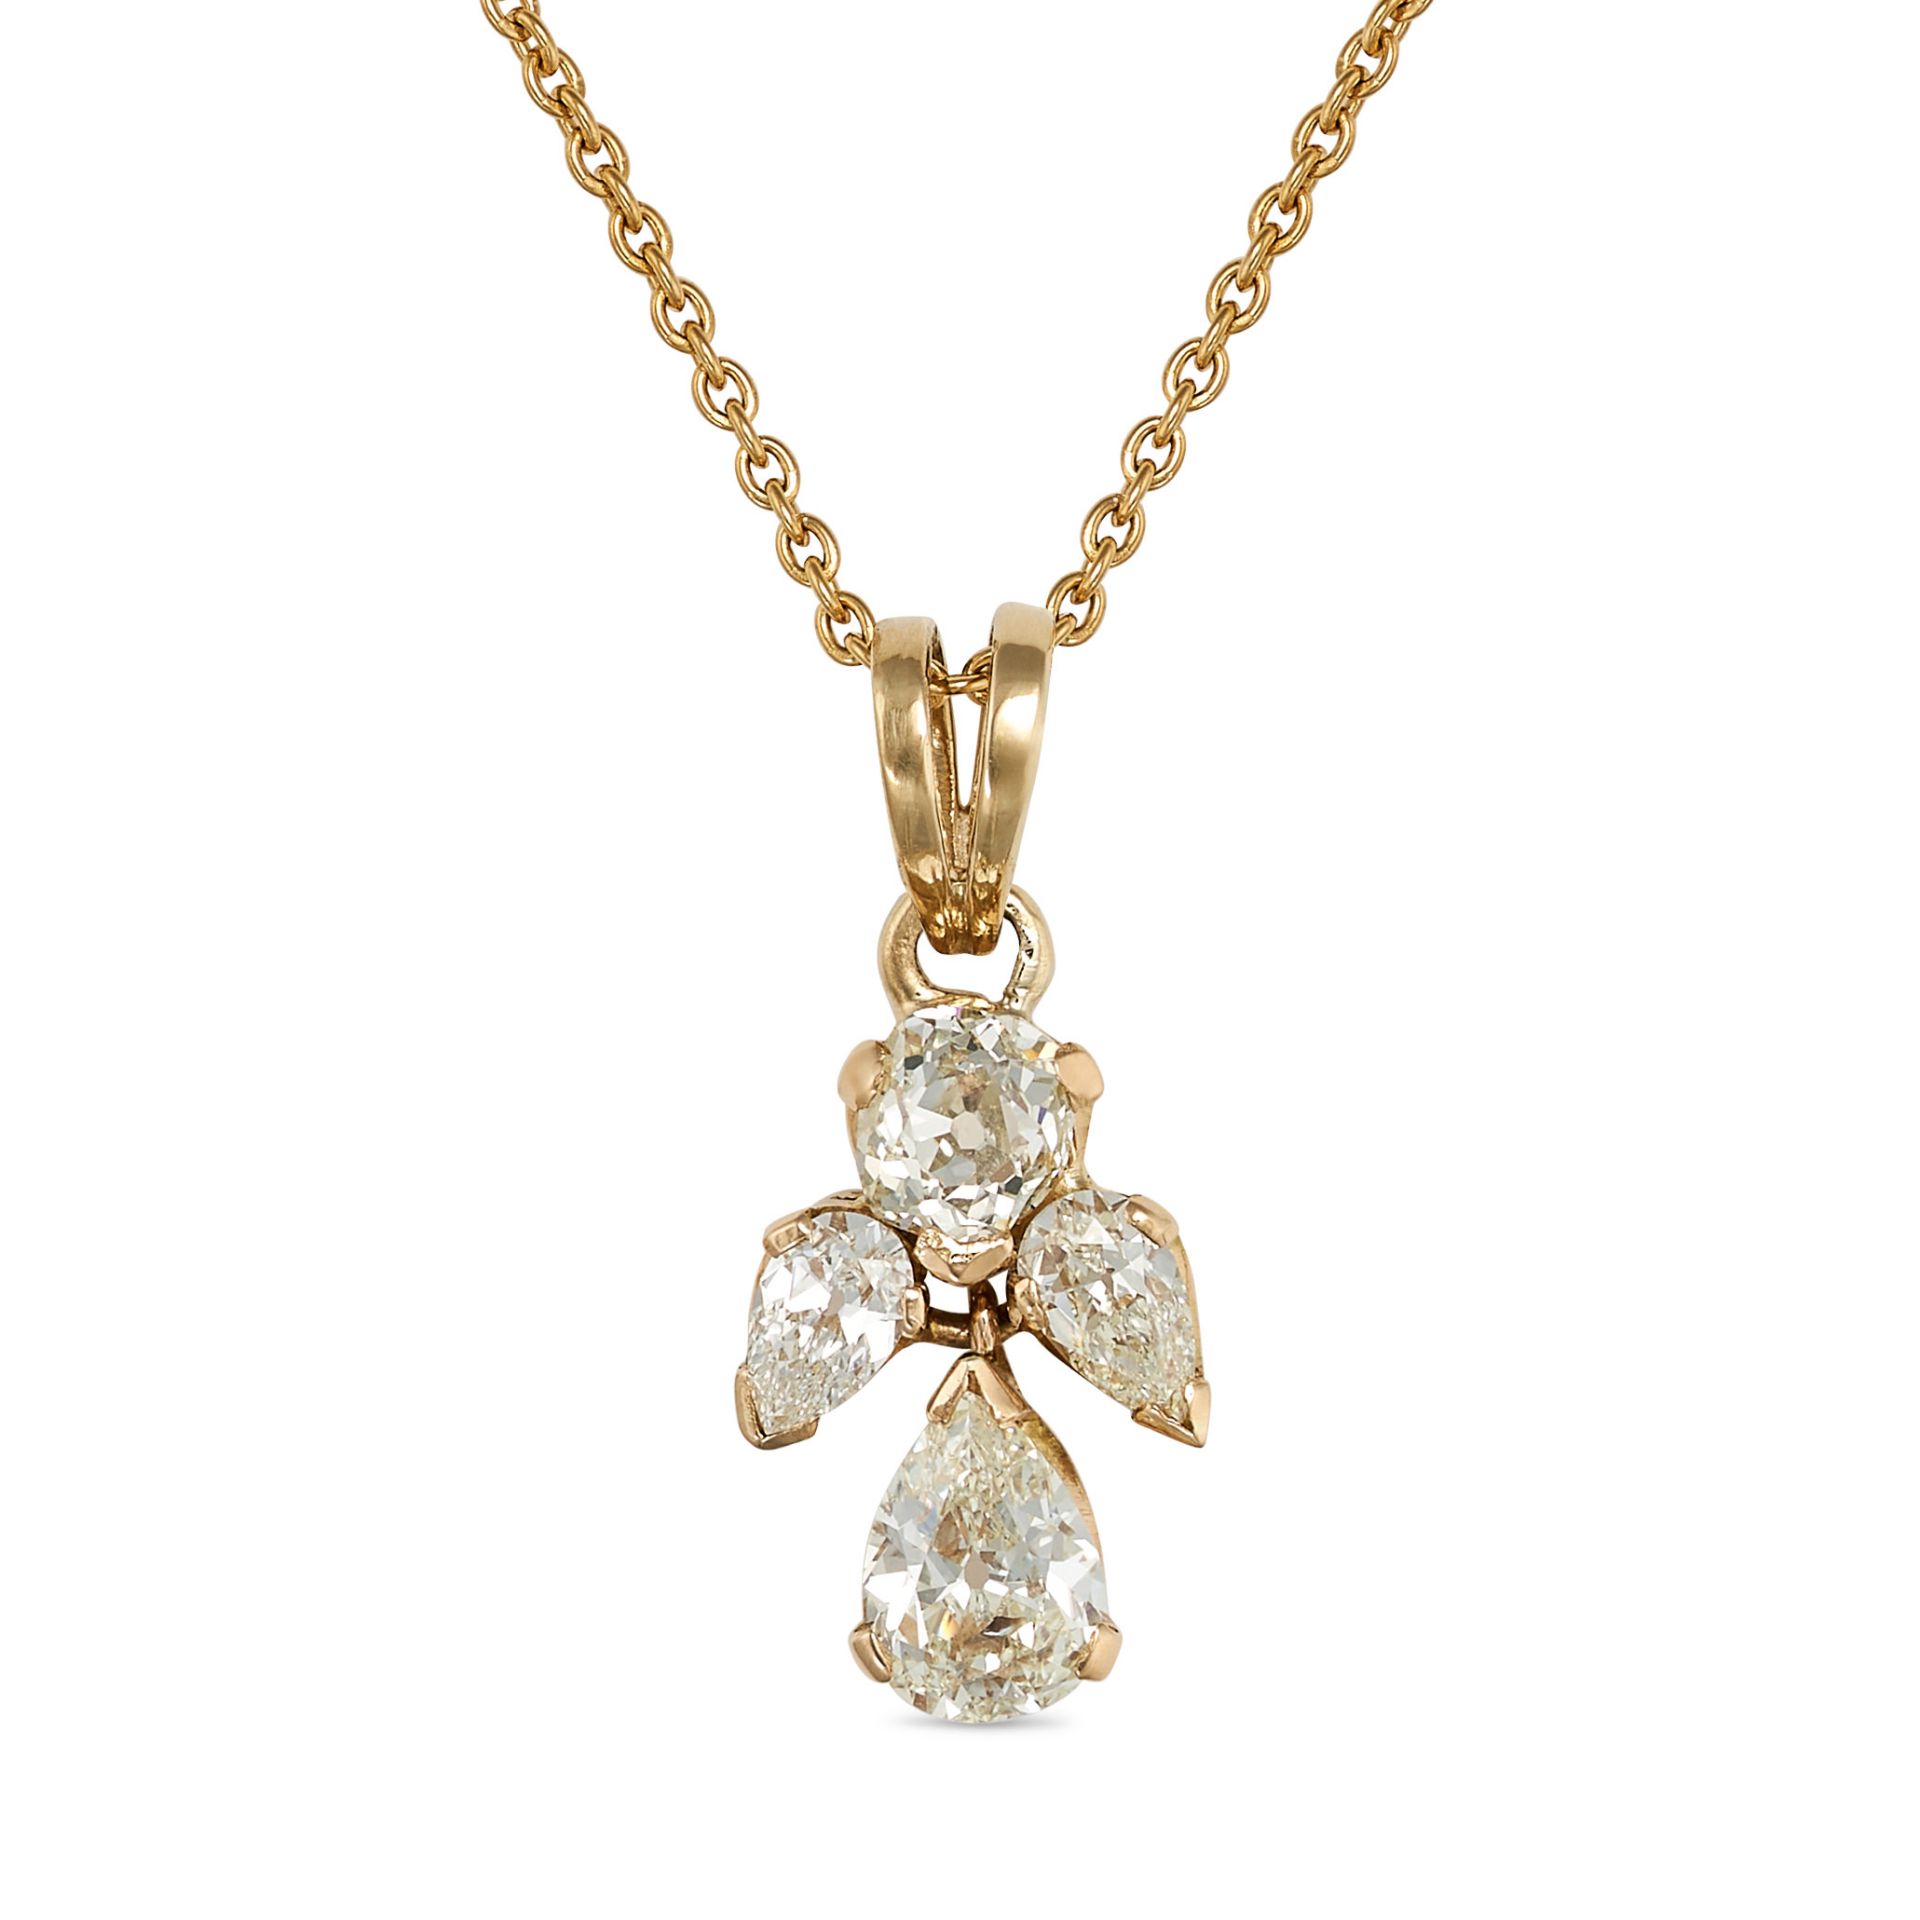 A DIAMOND PENDANT NECKLACE in 18ct yellow gold, the pendant set with an old cut diamond and two p...